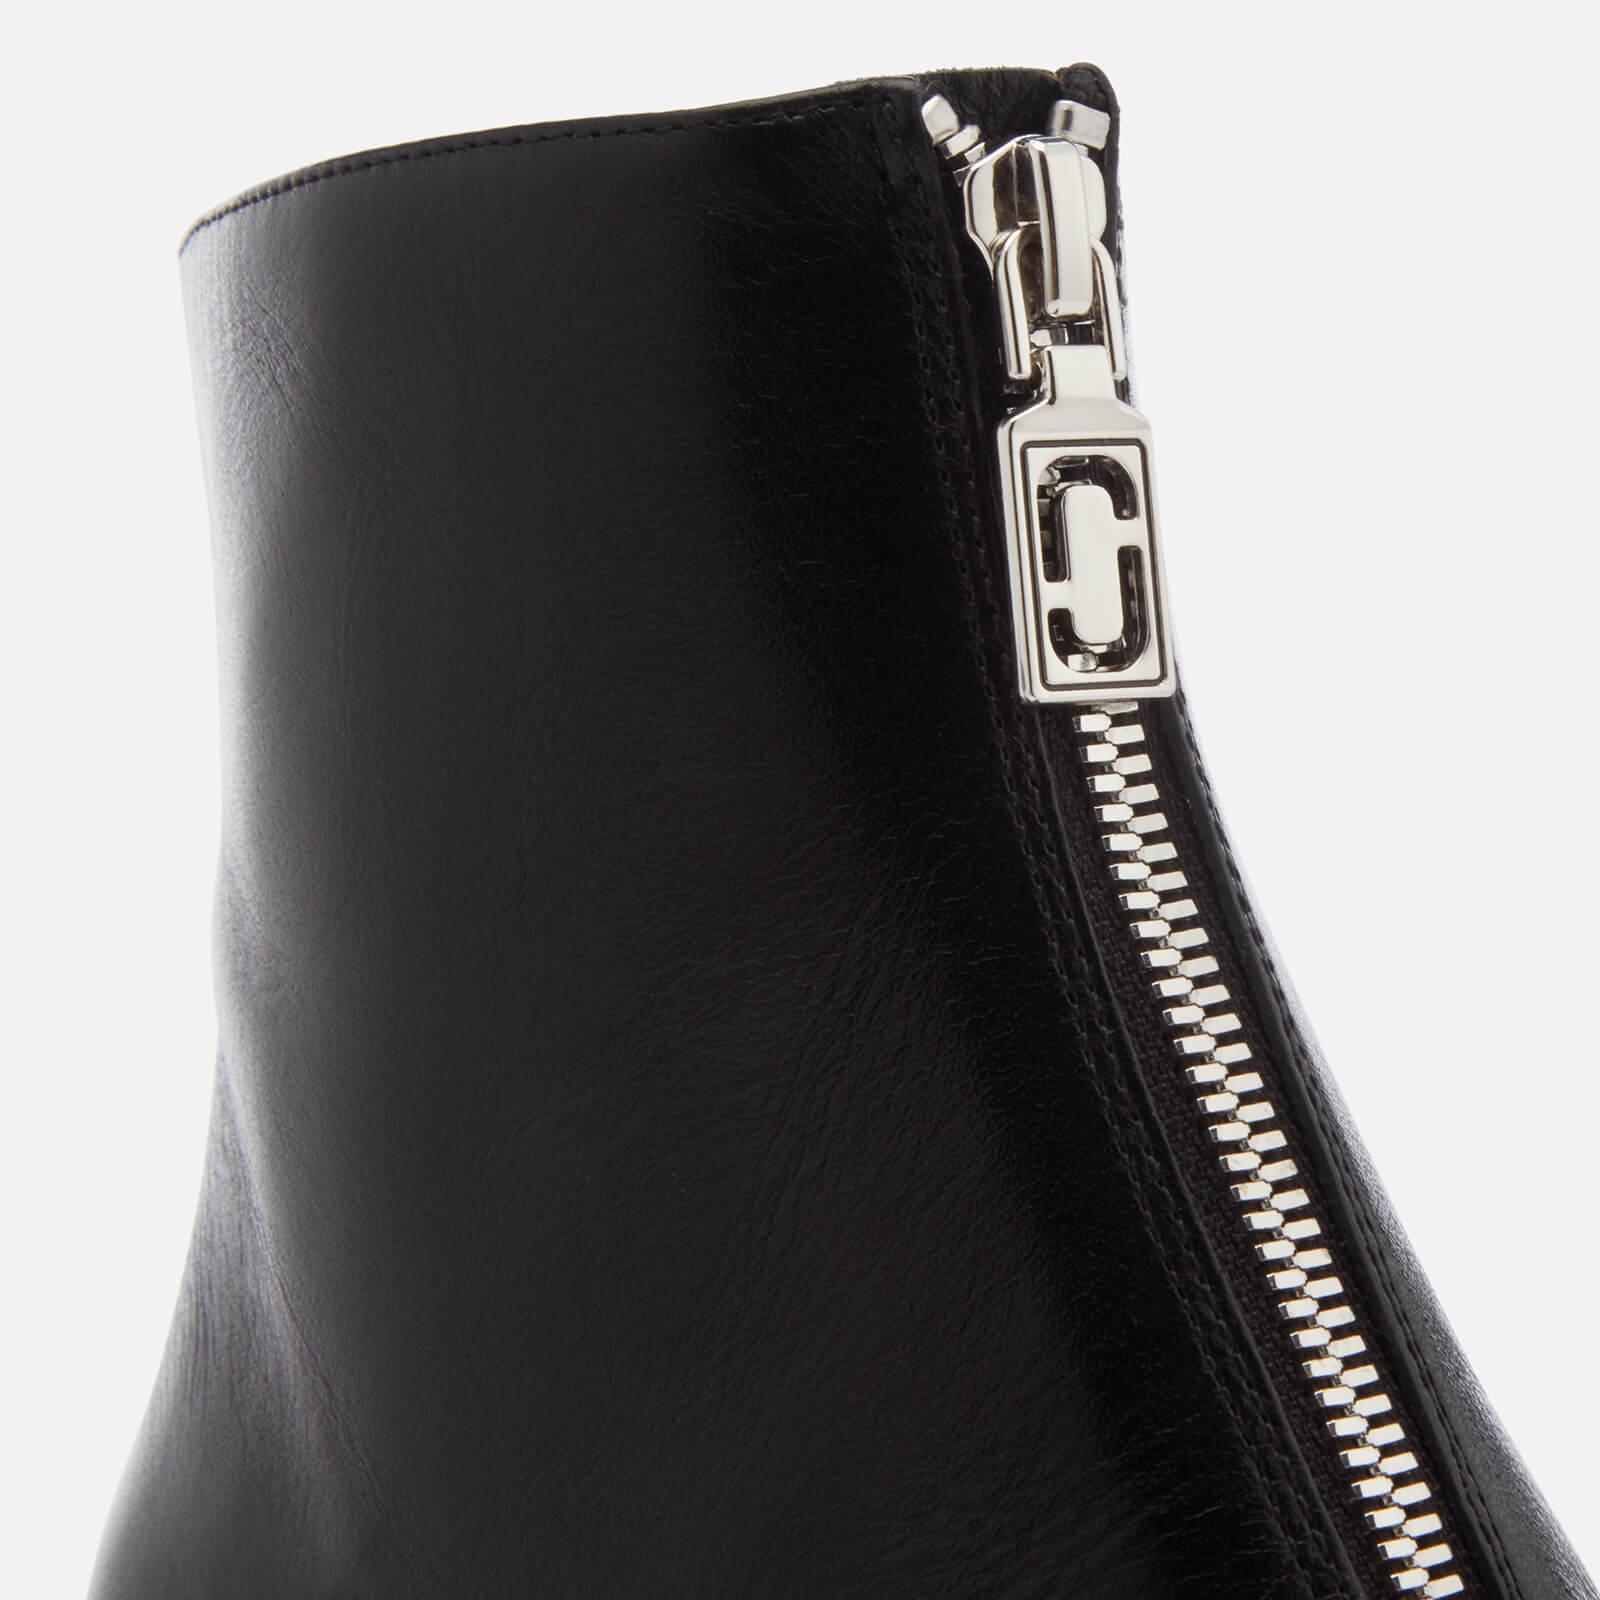 Marc Jacobs Leather Natalie Front Zip Ankle Boots in Black - Lyst